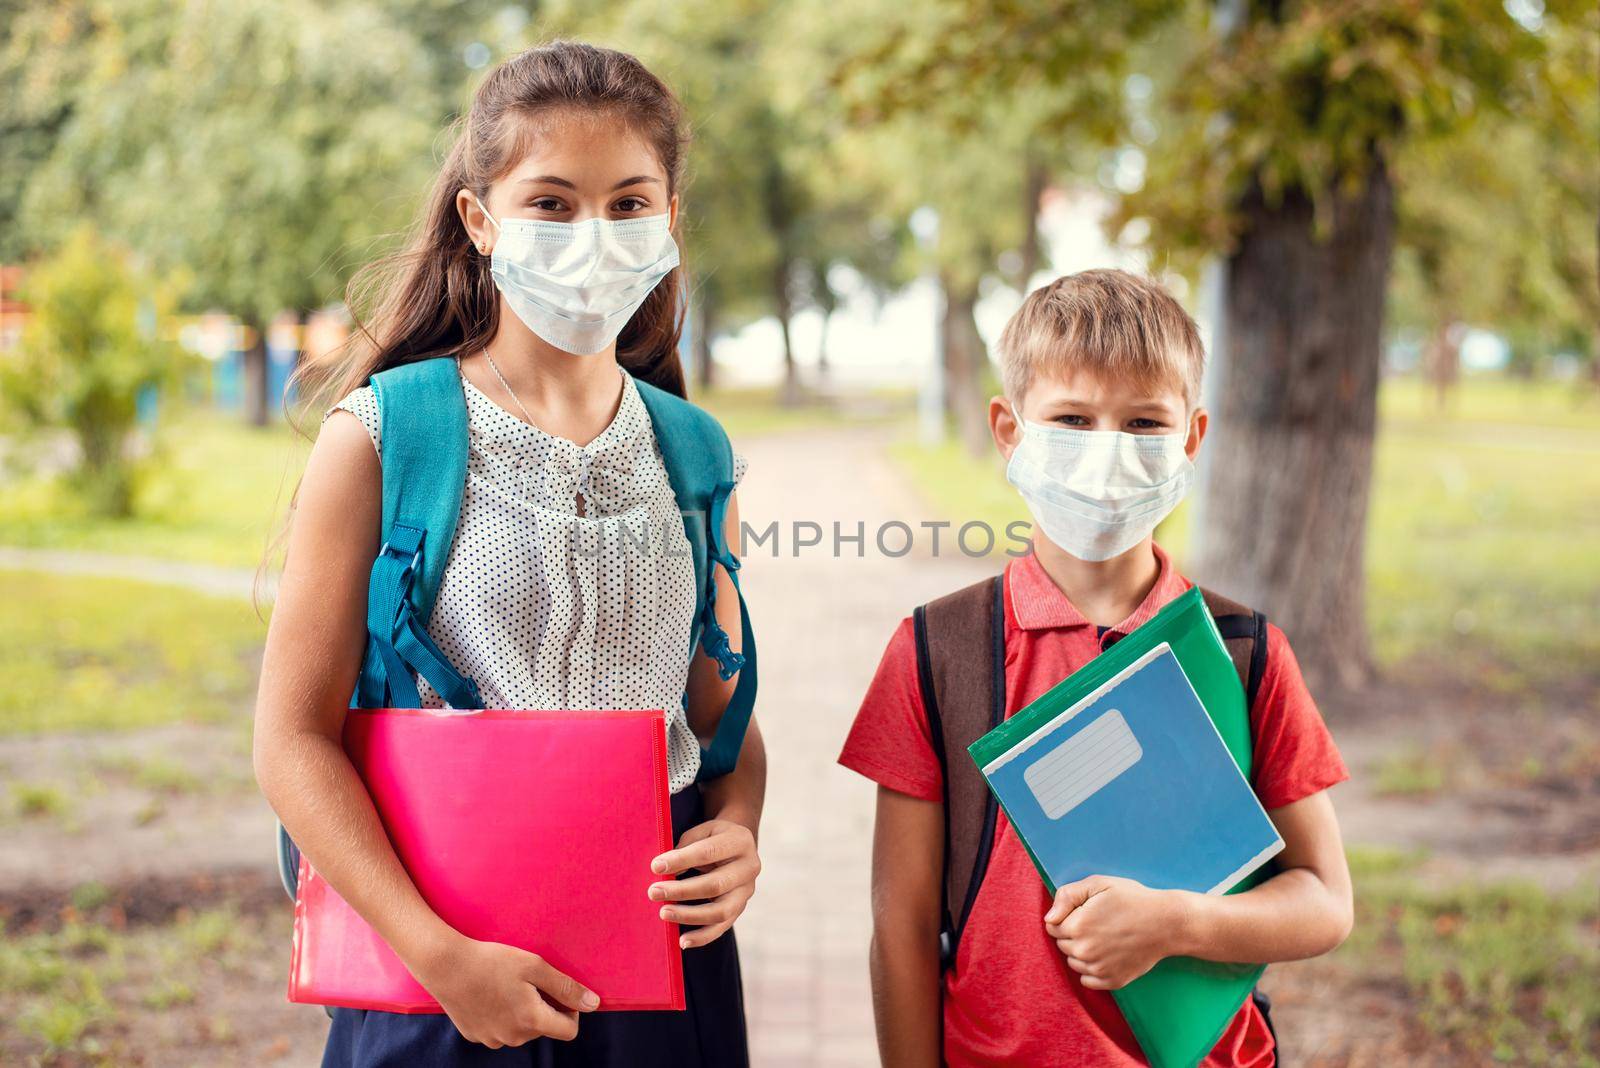 Male and female school learners going to school in the park, wearing medical masks to protect themselves from the dangerous virus